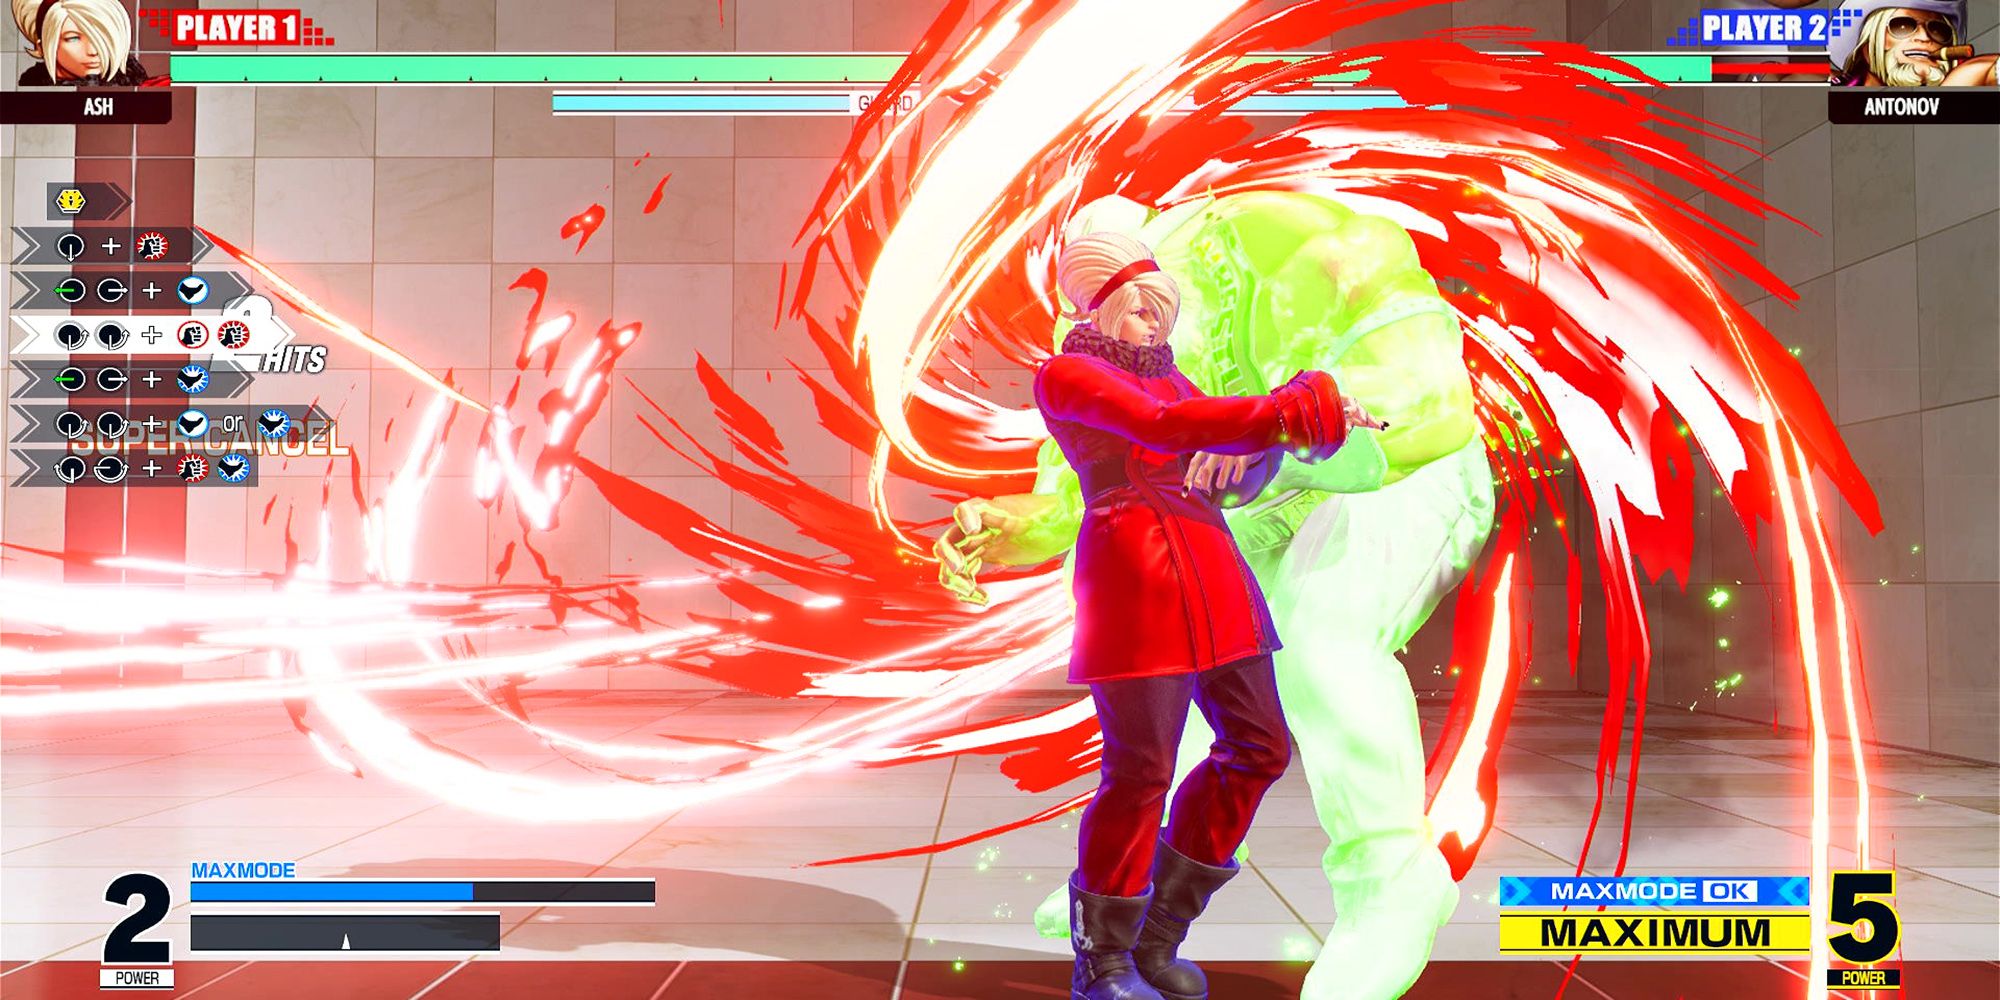 Ash pulverizes Antonov with a super cancel at the Training Stage in The King Of Fighters 15.